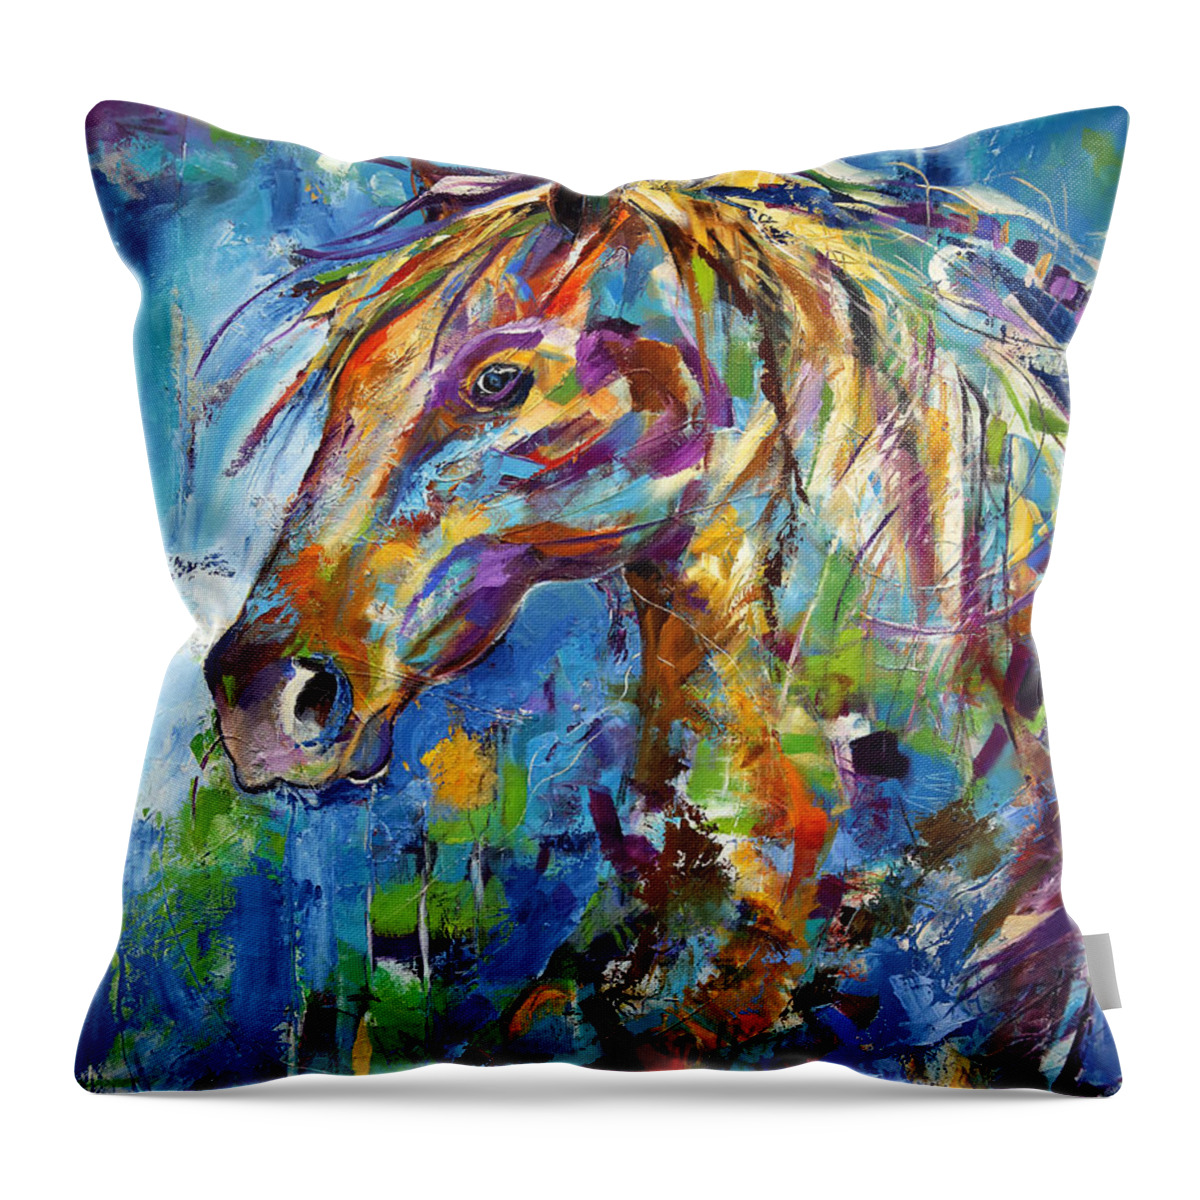 Colorful Horse Painting In Blues Throw Pillow featuring the painting Summer Lovin' by Laurie Pace